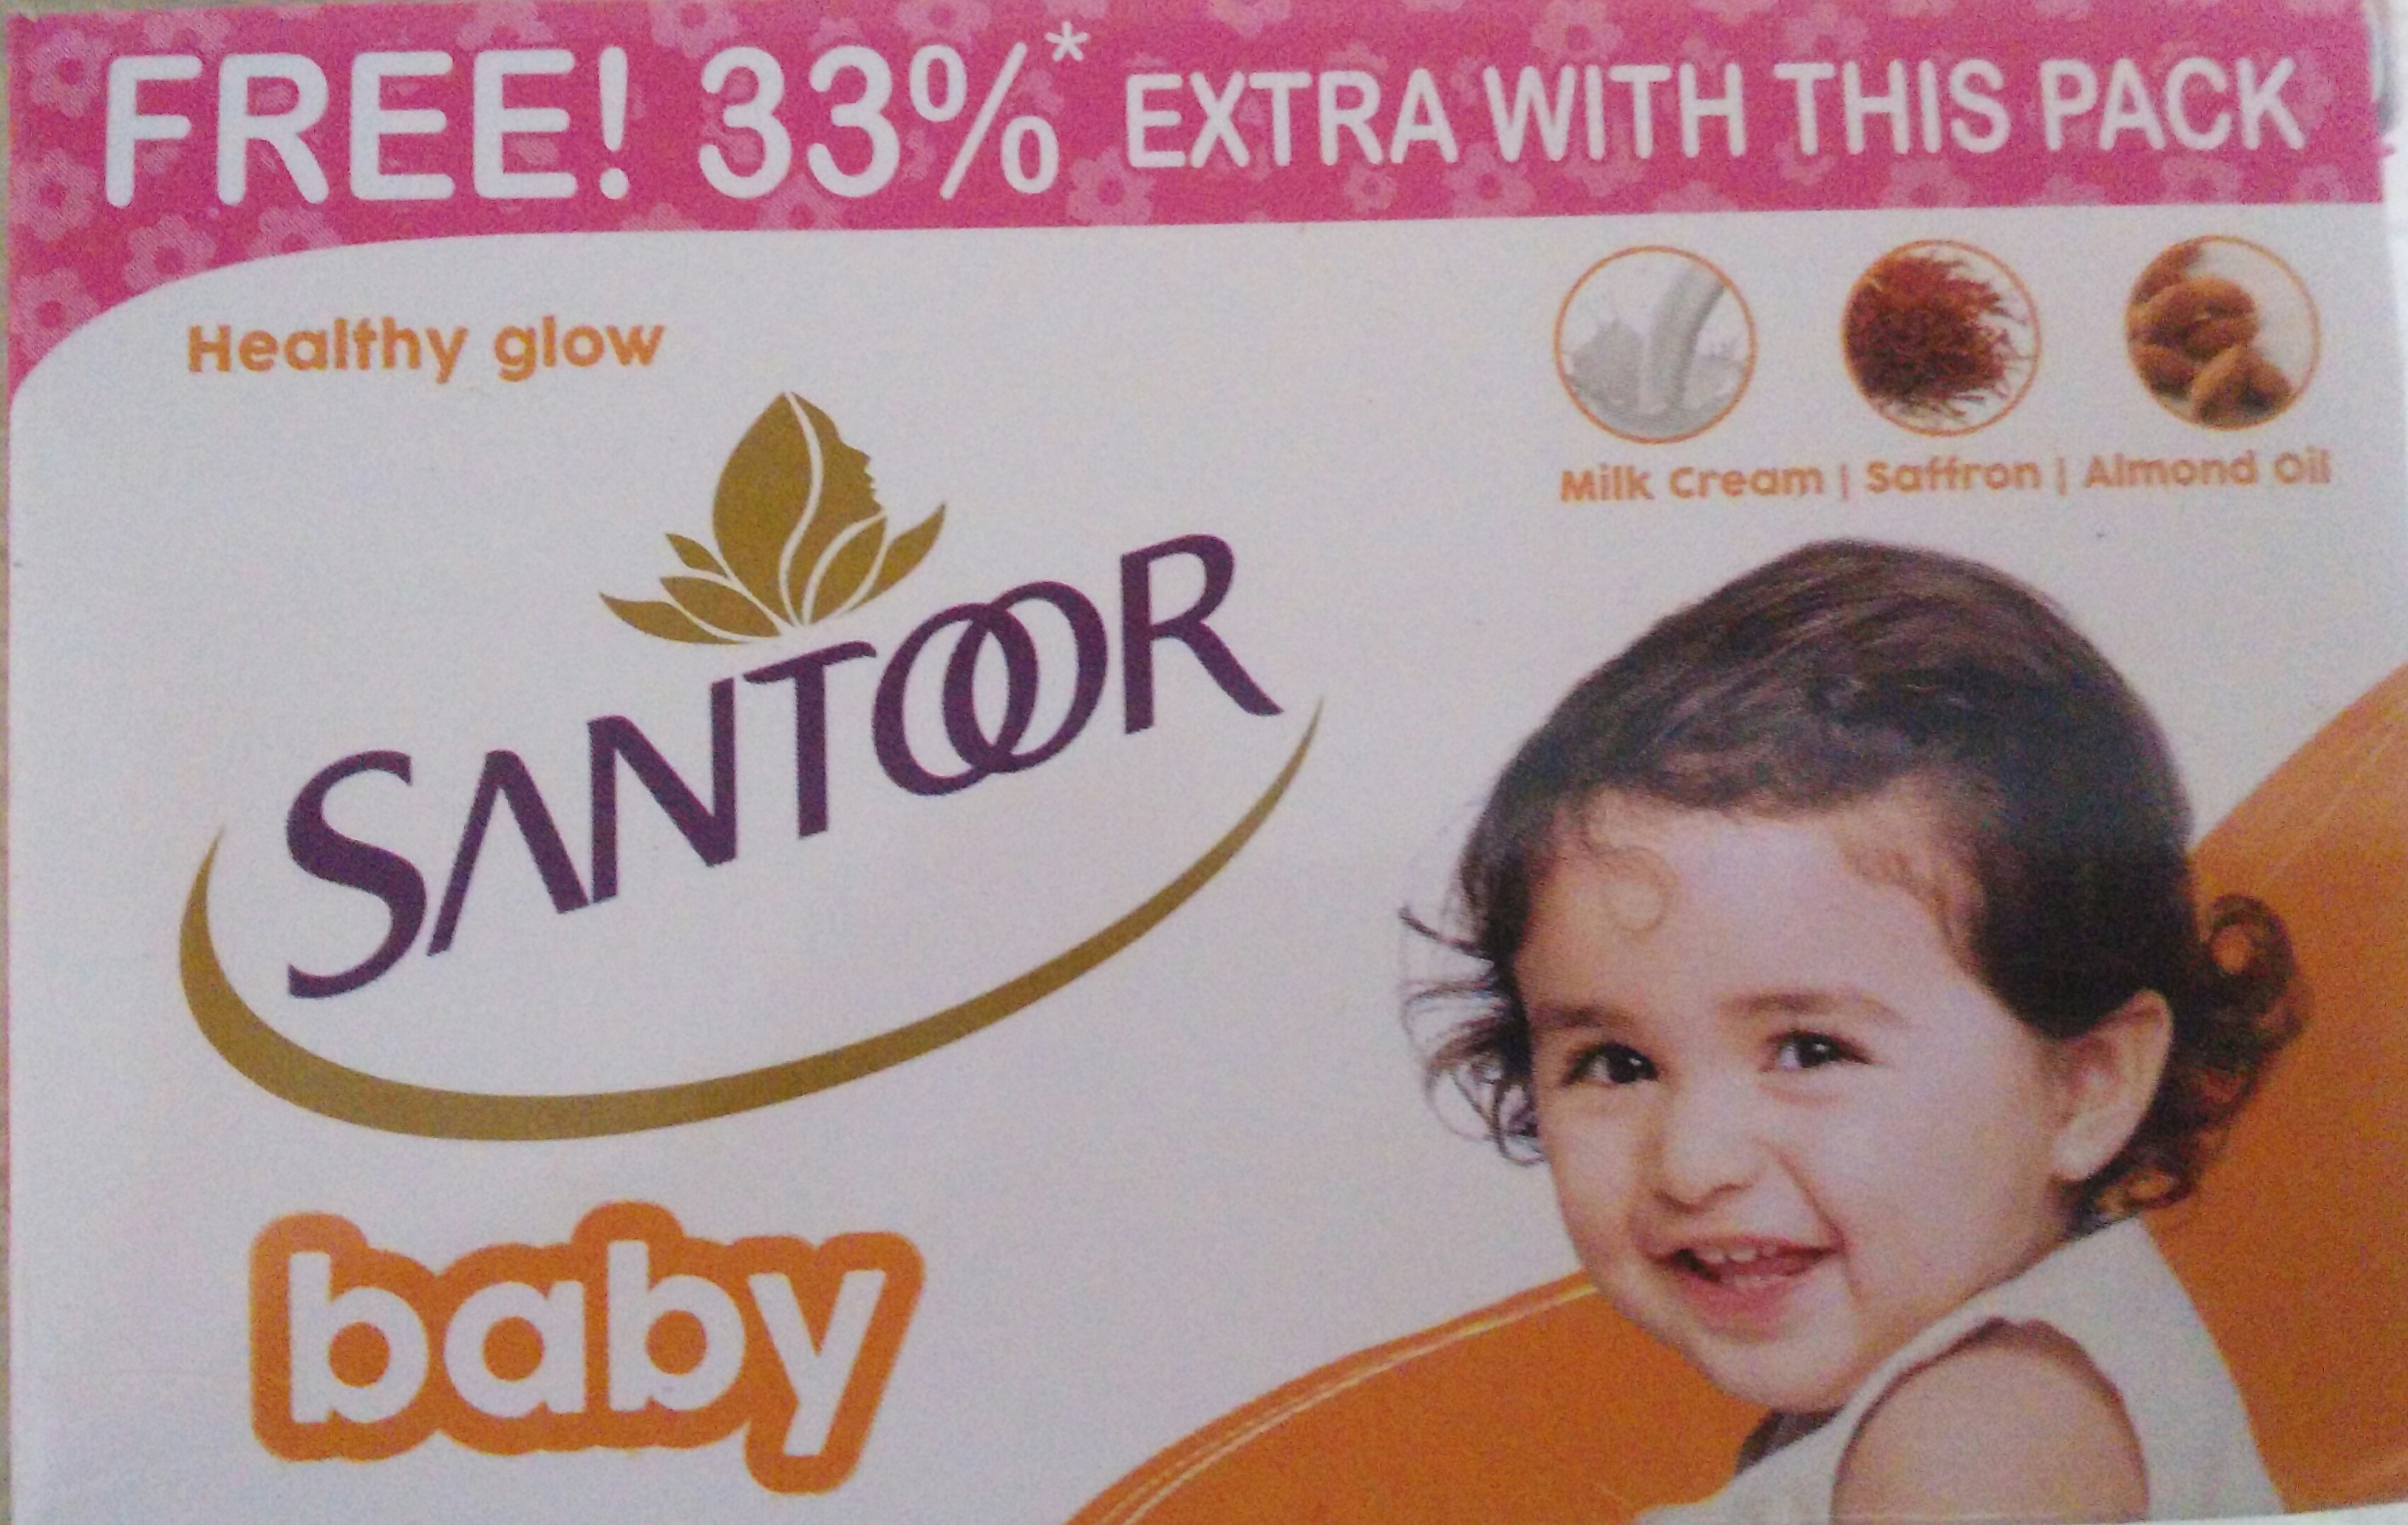 SANTOOR BABY SOAP HEALTHY GLOW(33% EXTRA WITH THIS PACK) 100g SOAP